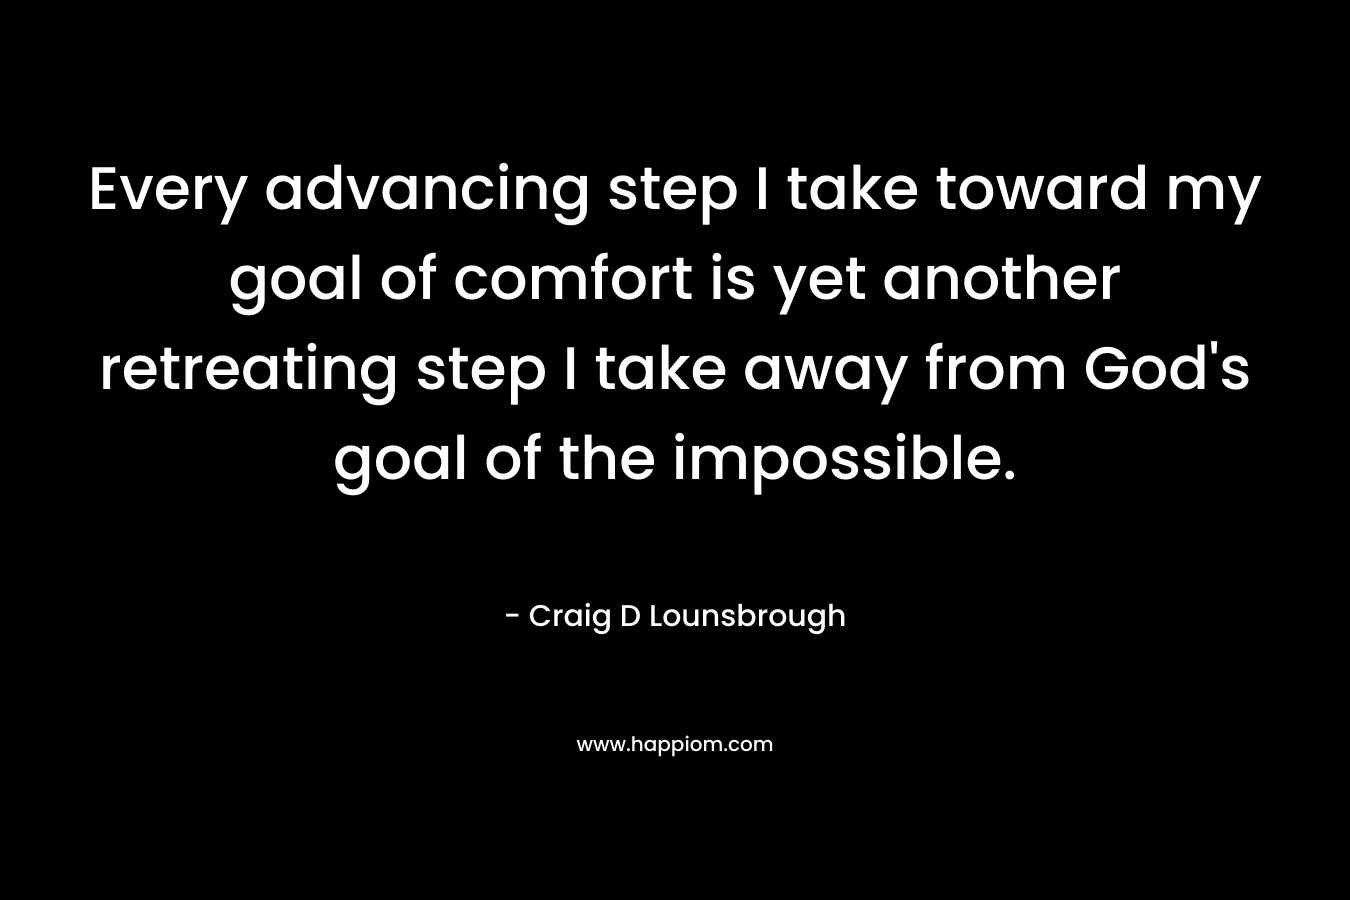 Every advancing step I take toward my goal of comfort is yet another retreating step I take away from God's goal of the impossible.